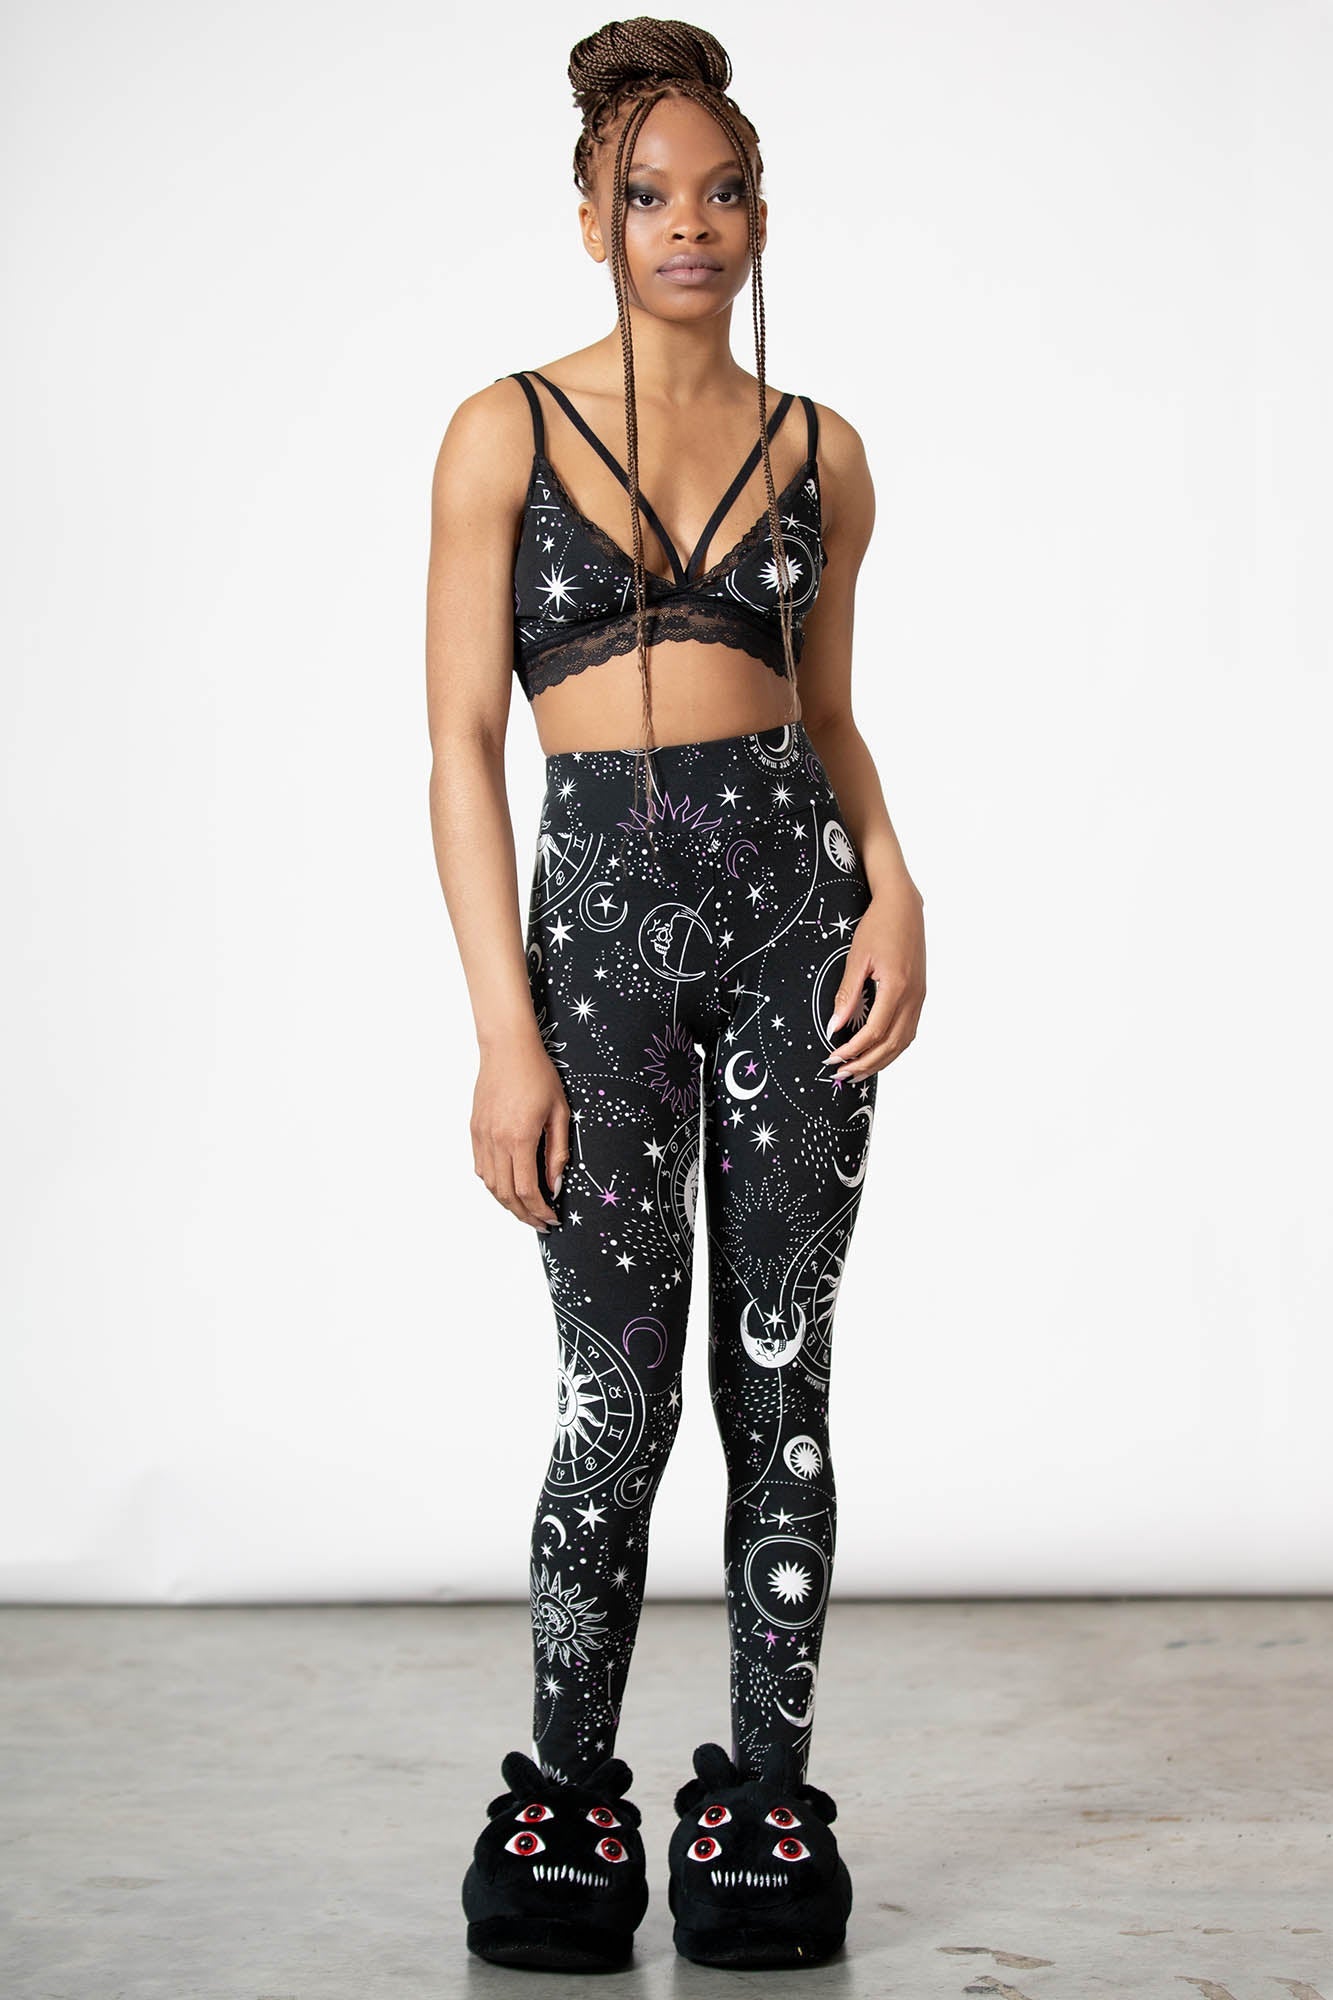 Galaxy one Leggings - Official Store